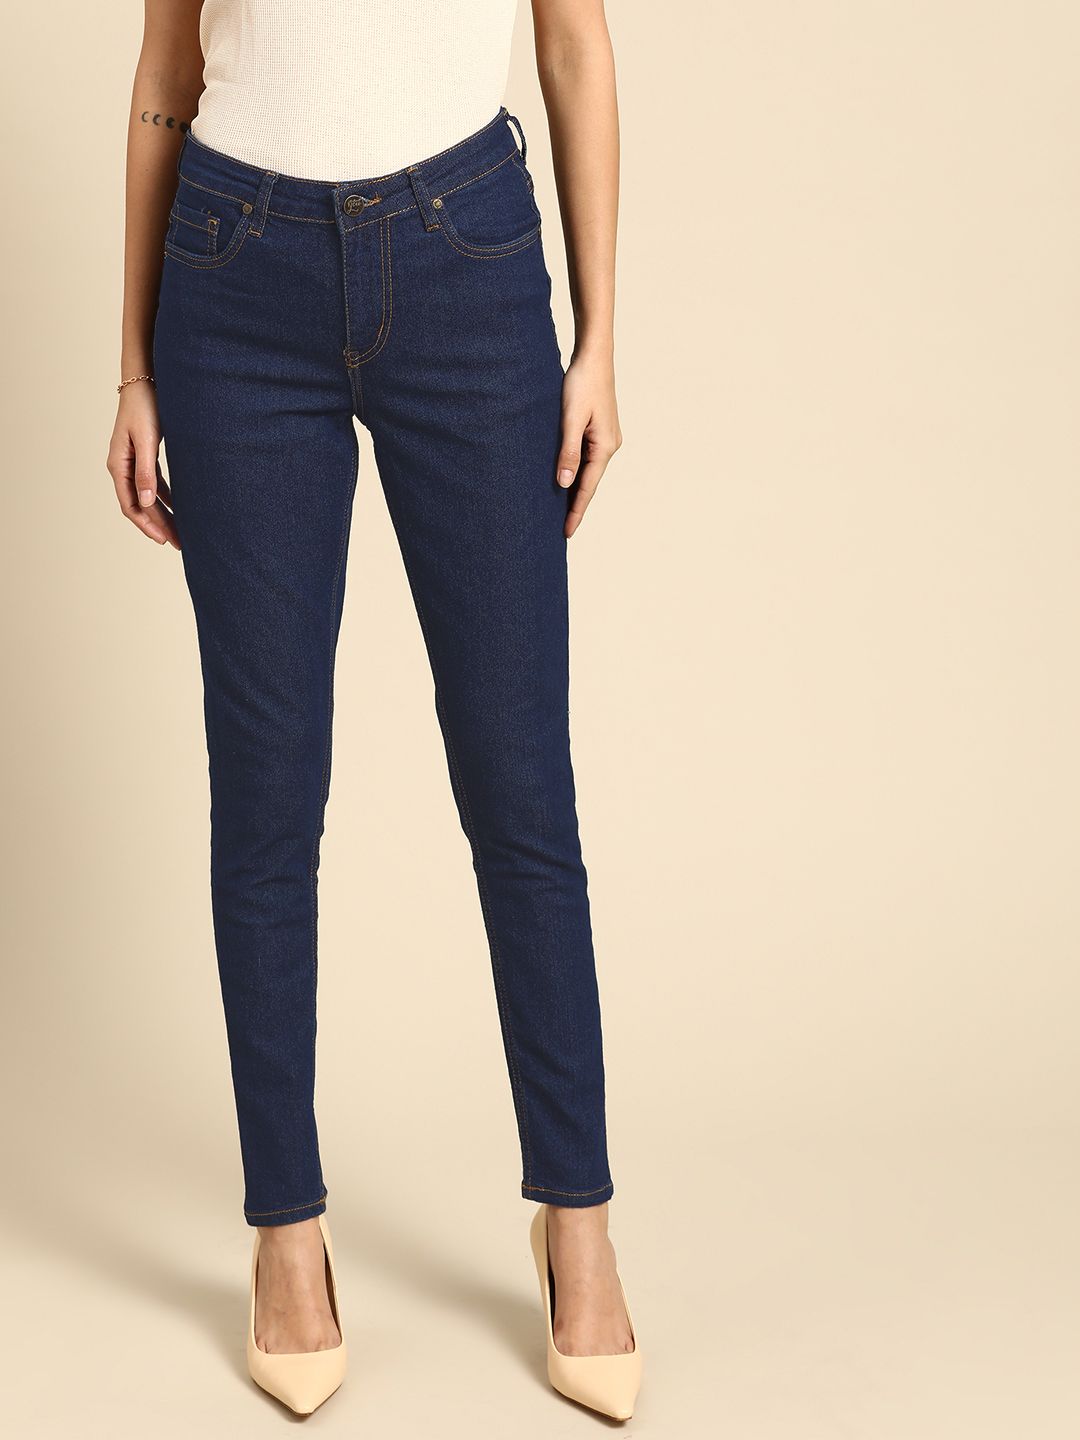 all about you Women Navy Blue Skinny Fit Stretchable Jeans Price in India